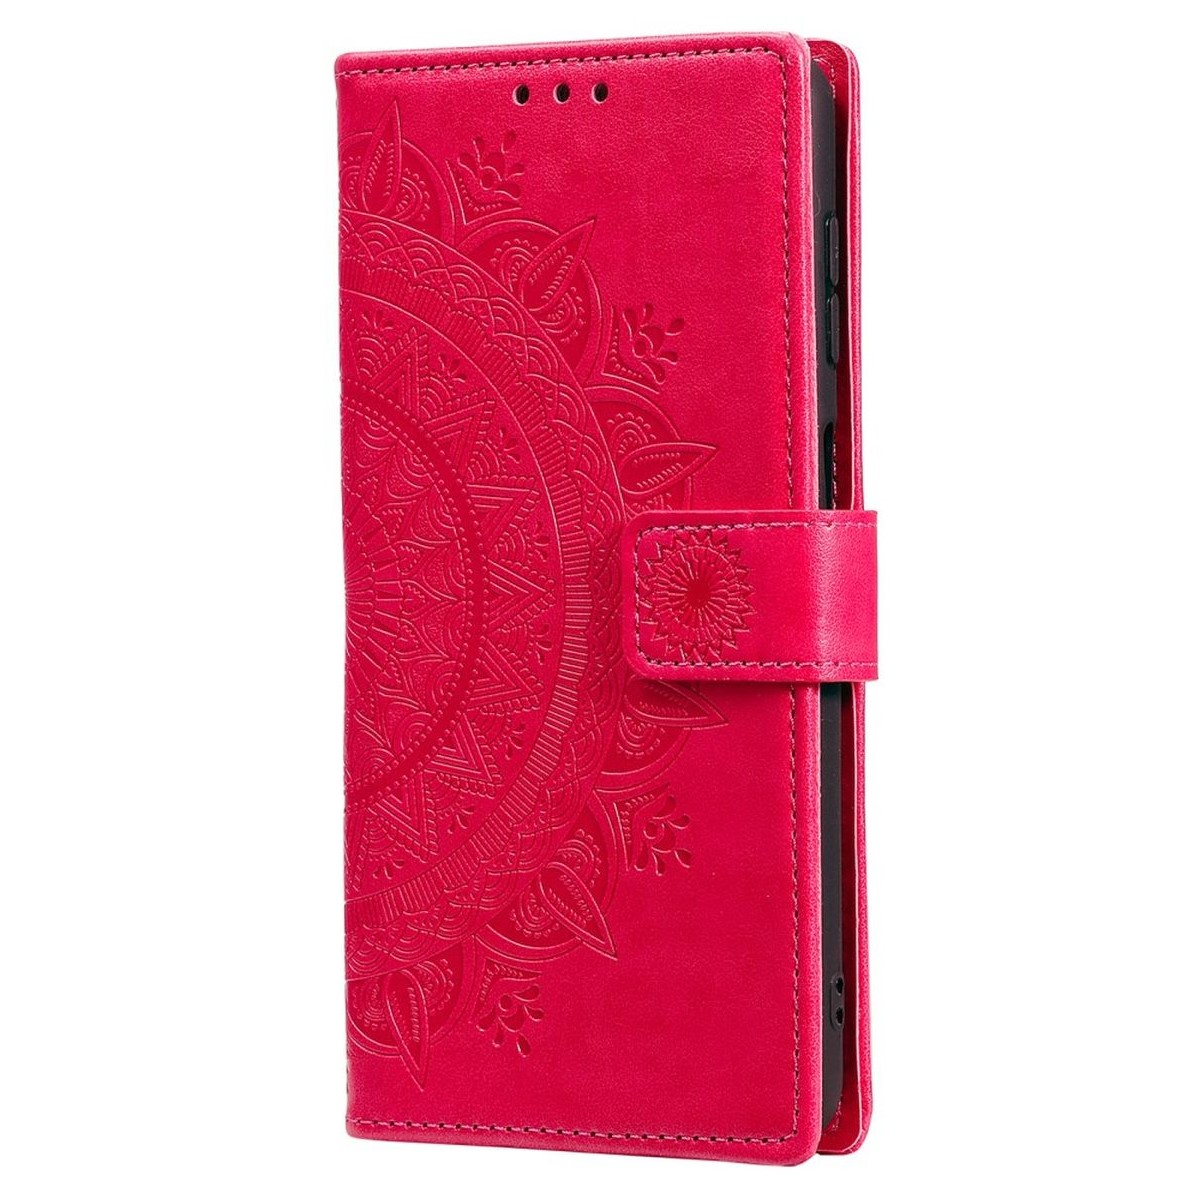 COVERKINGZ Klapphülle Ultra, S22 mit Mandala Pink Muster, Galaxy Samsung, Bookcover